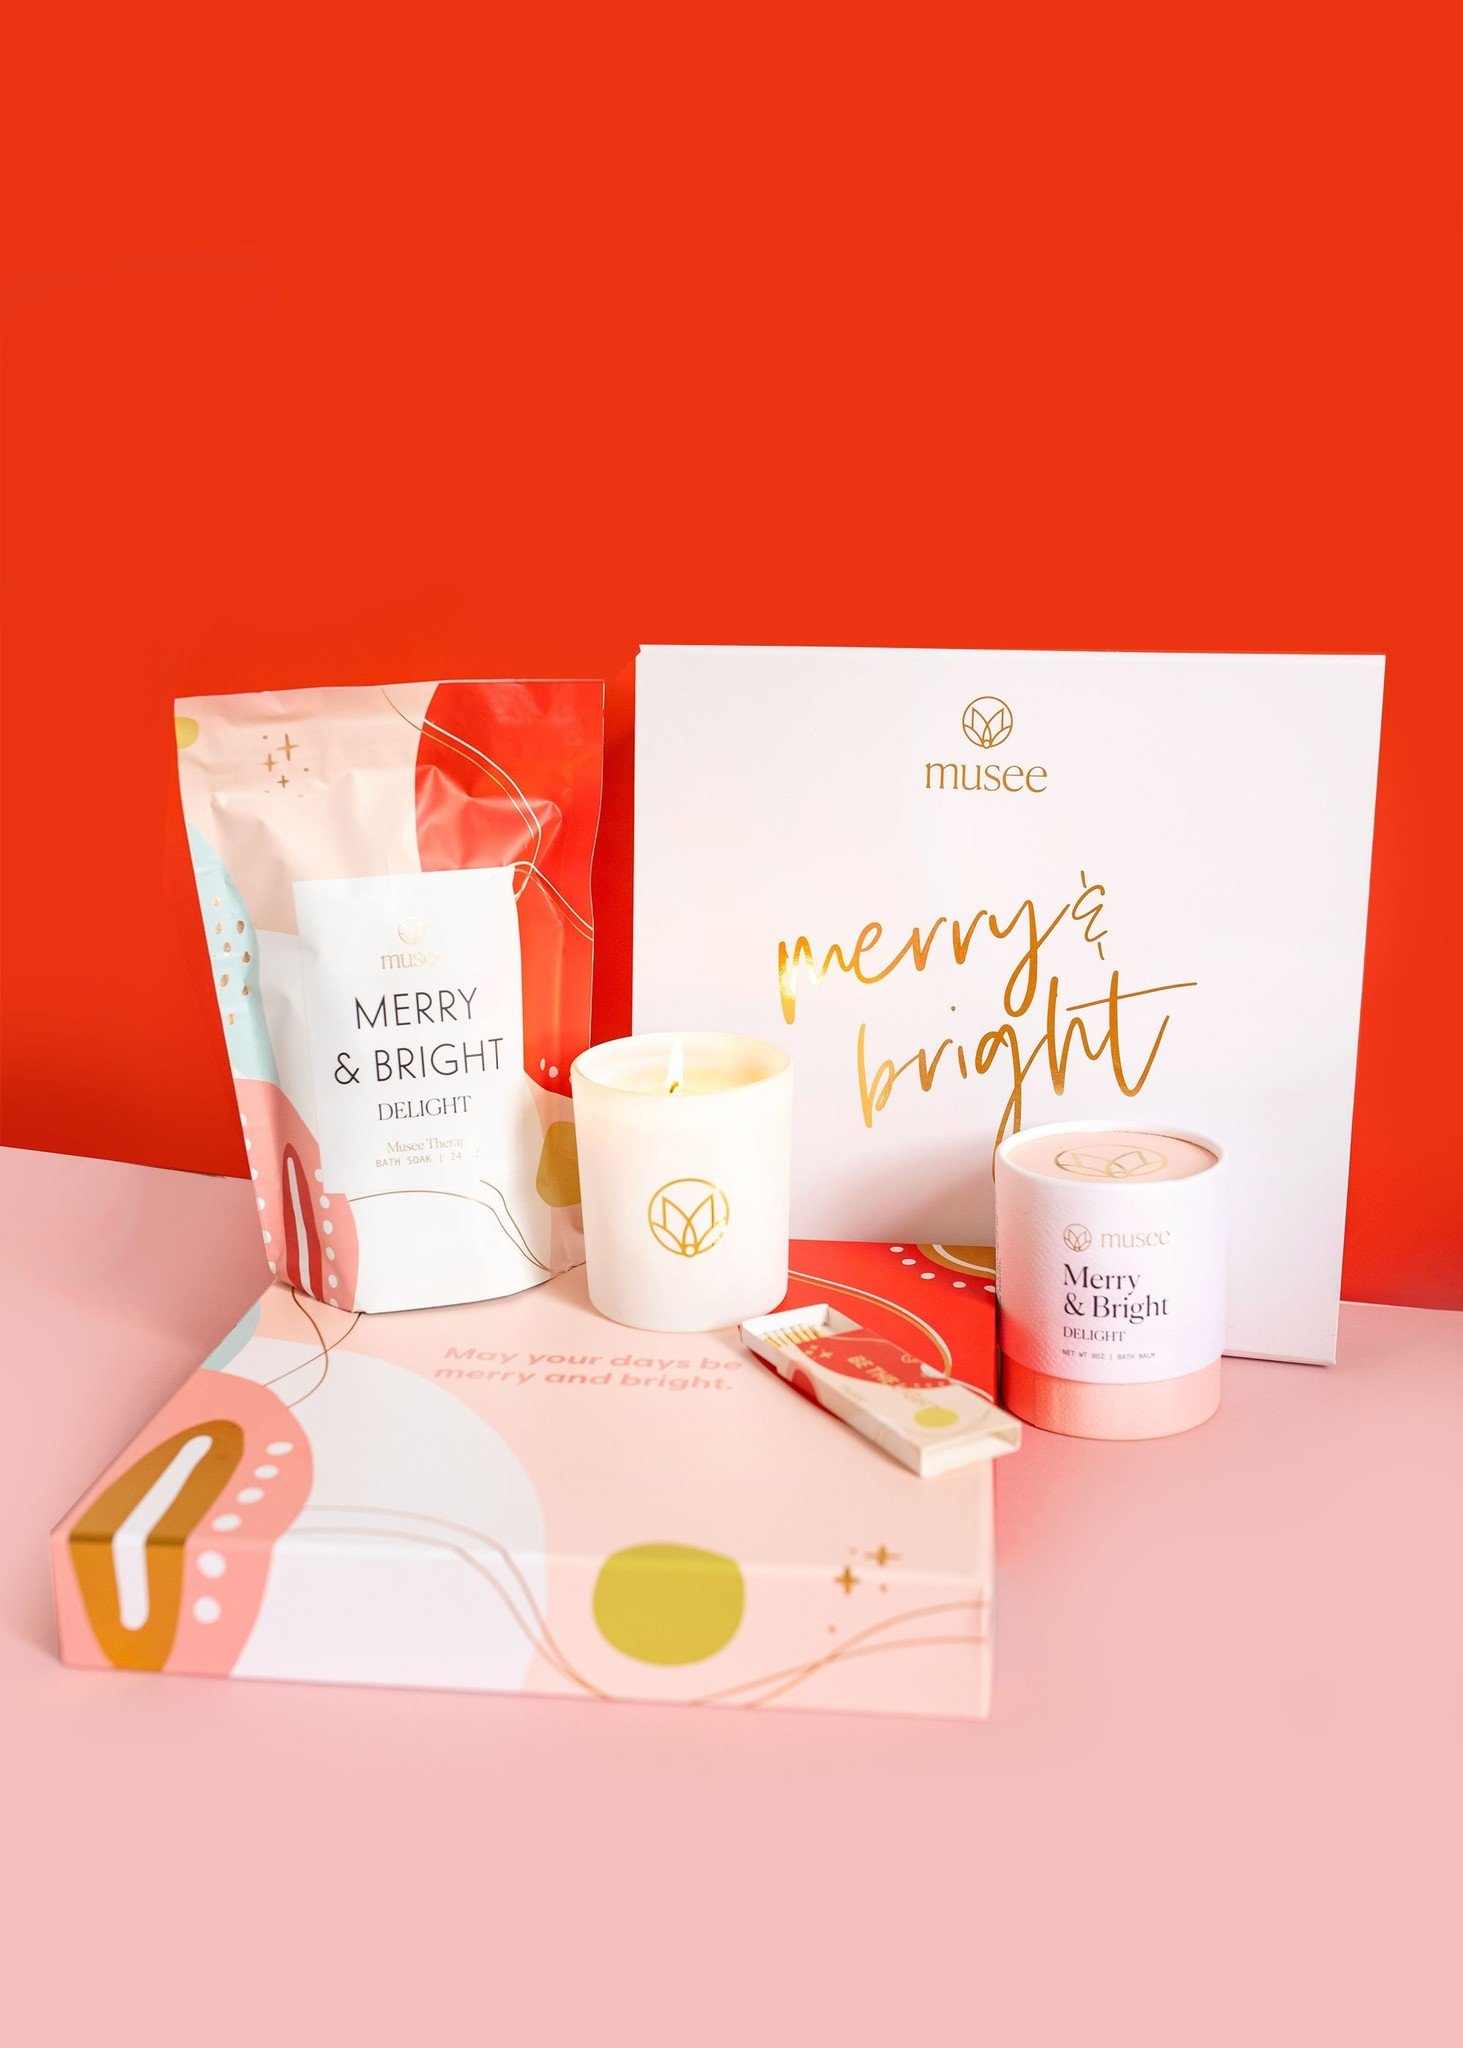 Musee Bath Merry and Bright Gift Set